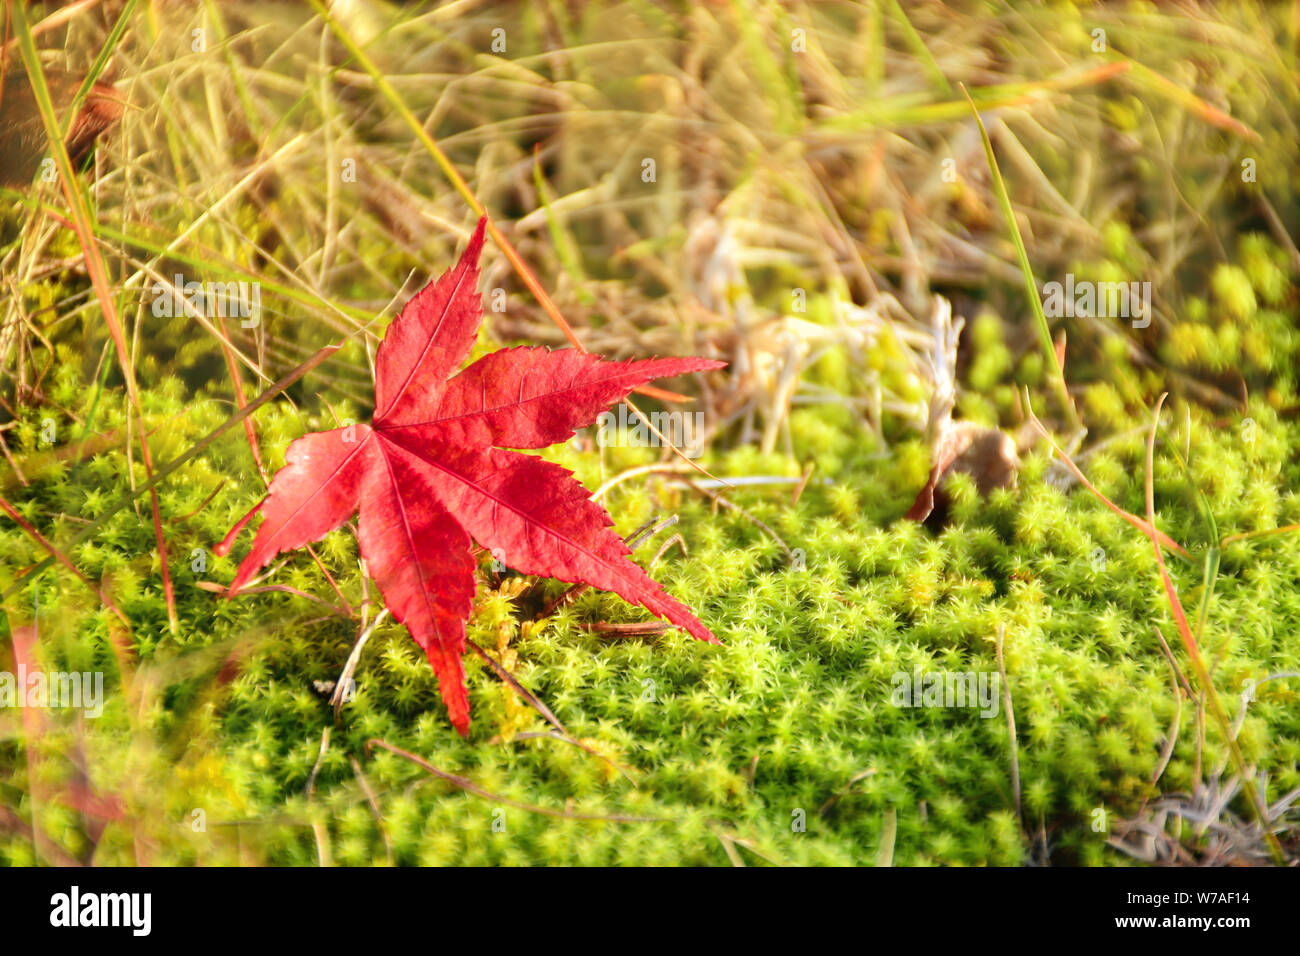 Red Japanese maple leaf on fresh green moss floor. Red and green autumn background. Stock Photo